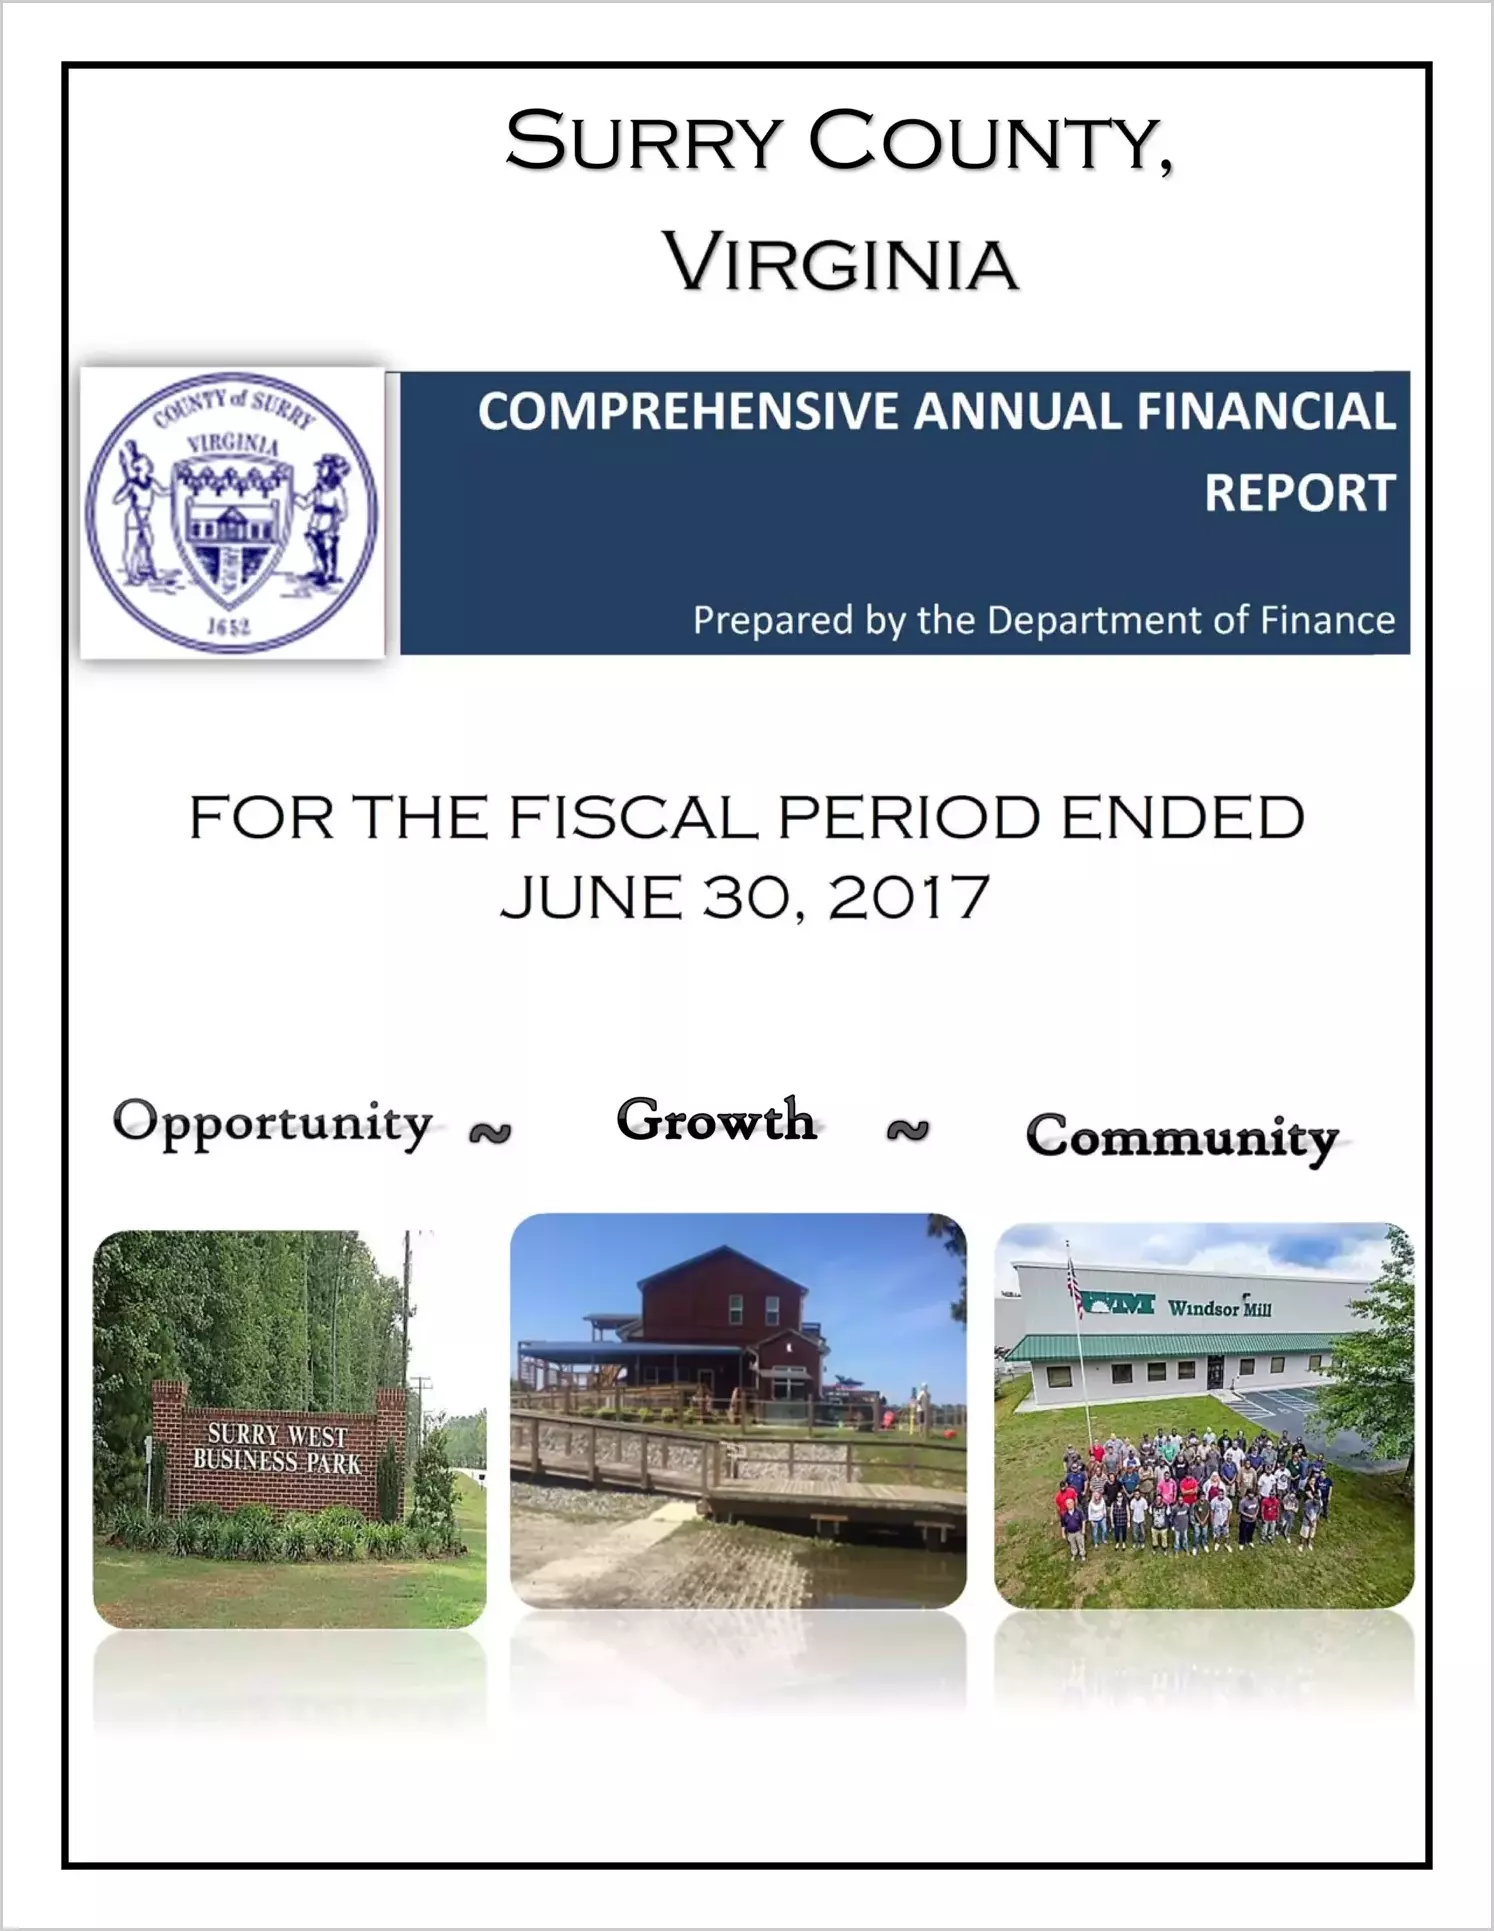 2017 Annual Financial Report for County of Surry